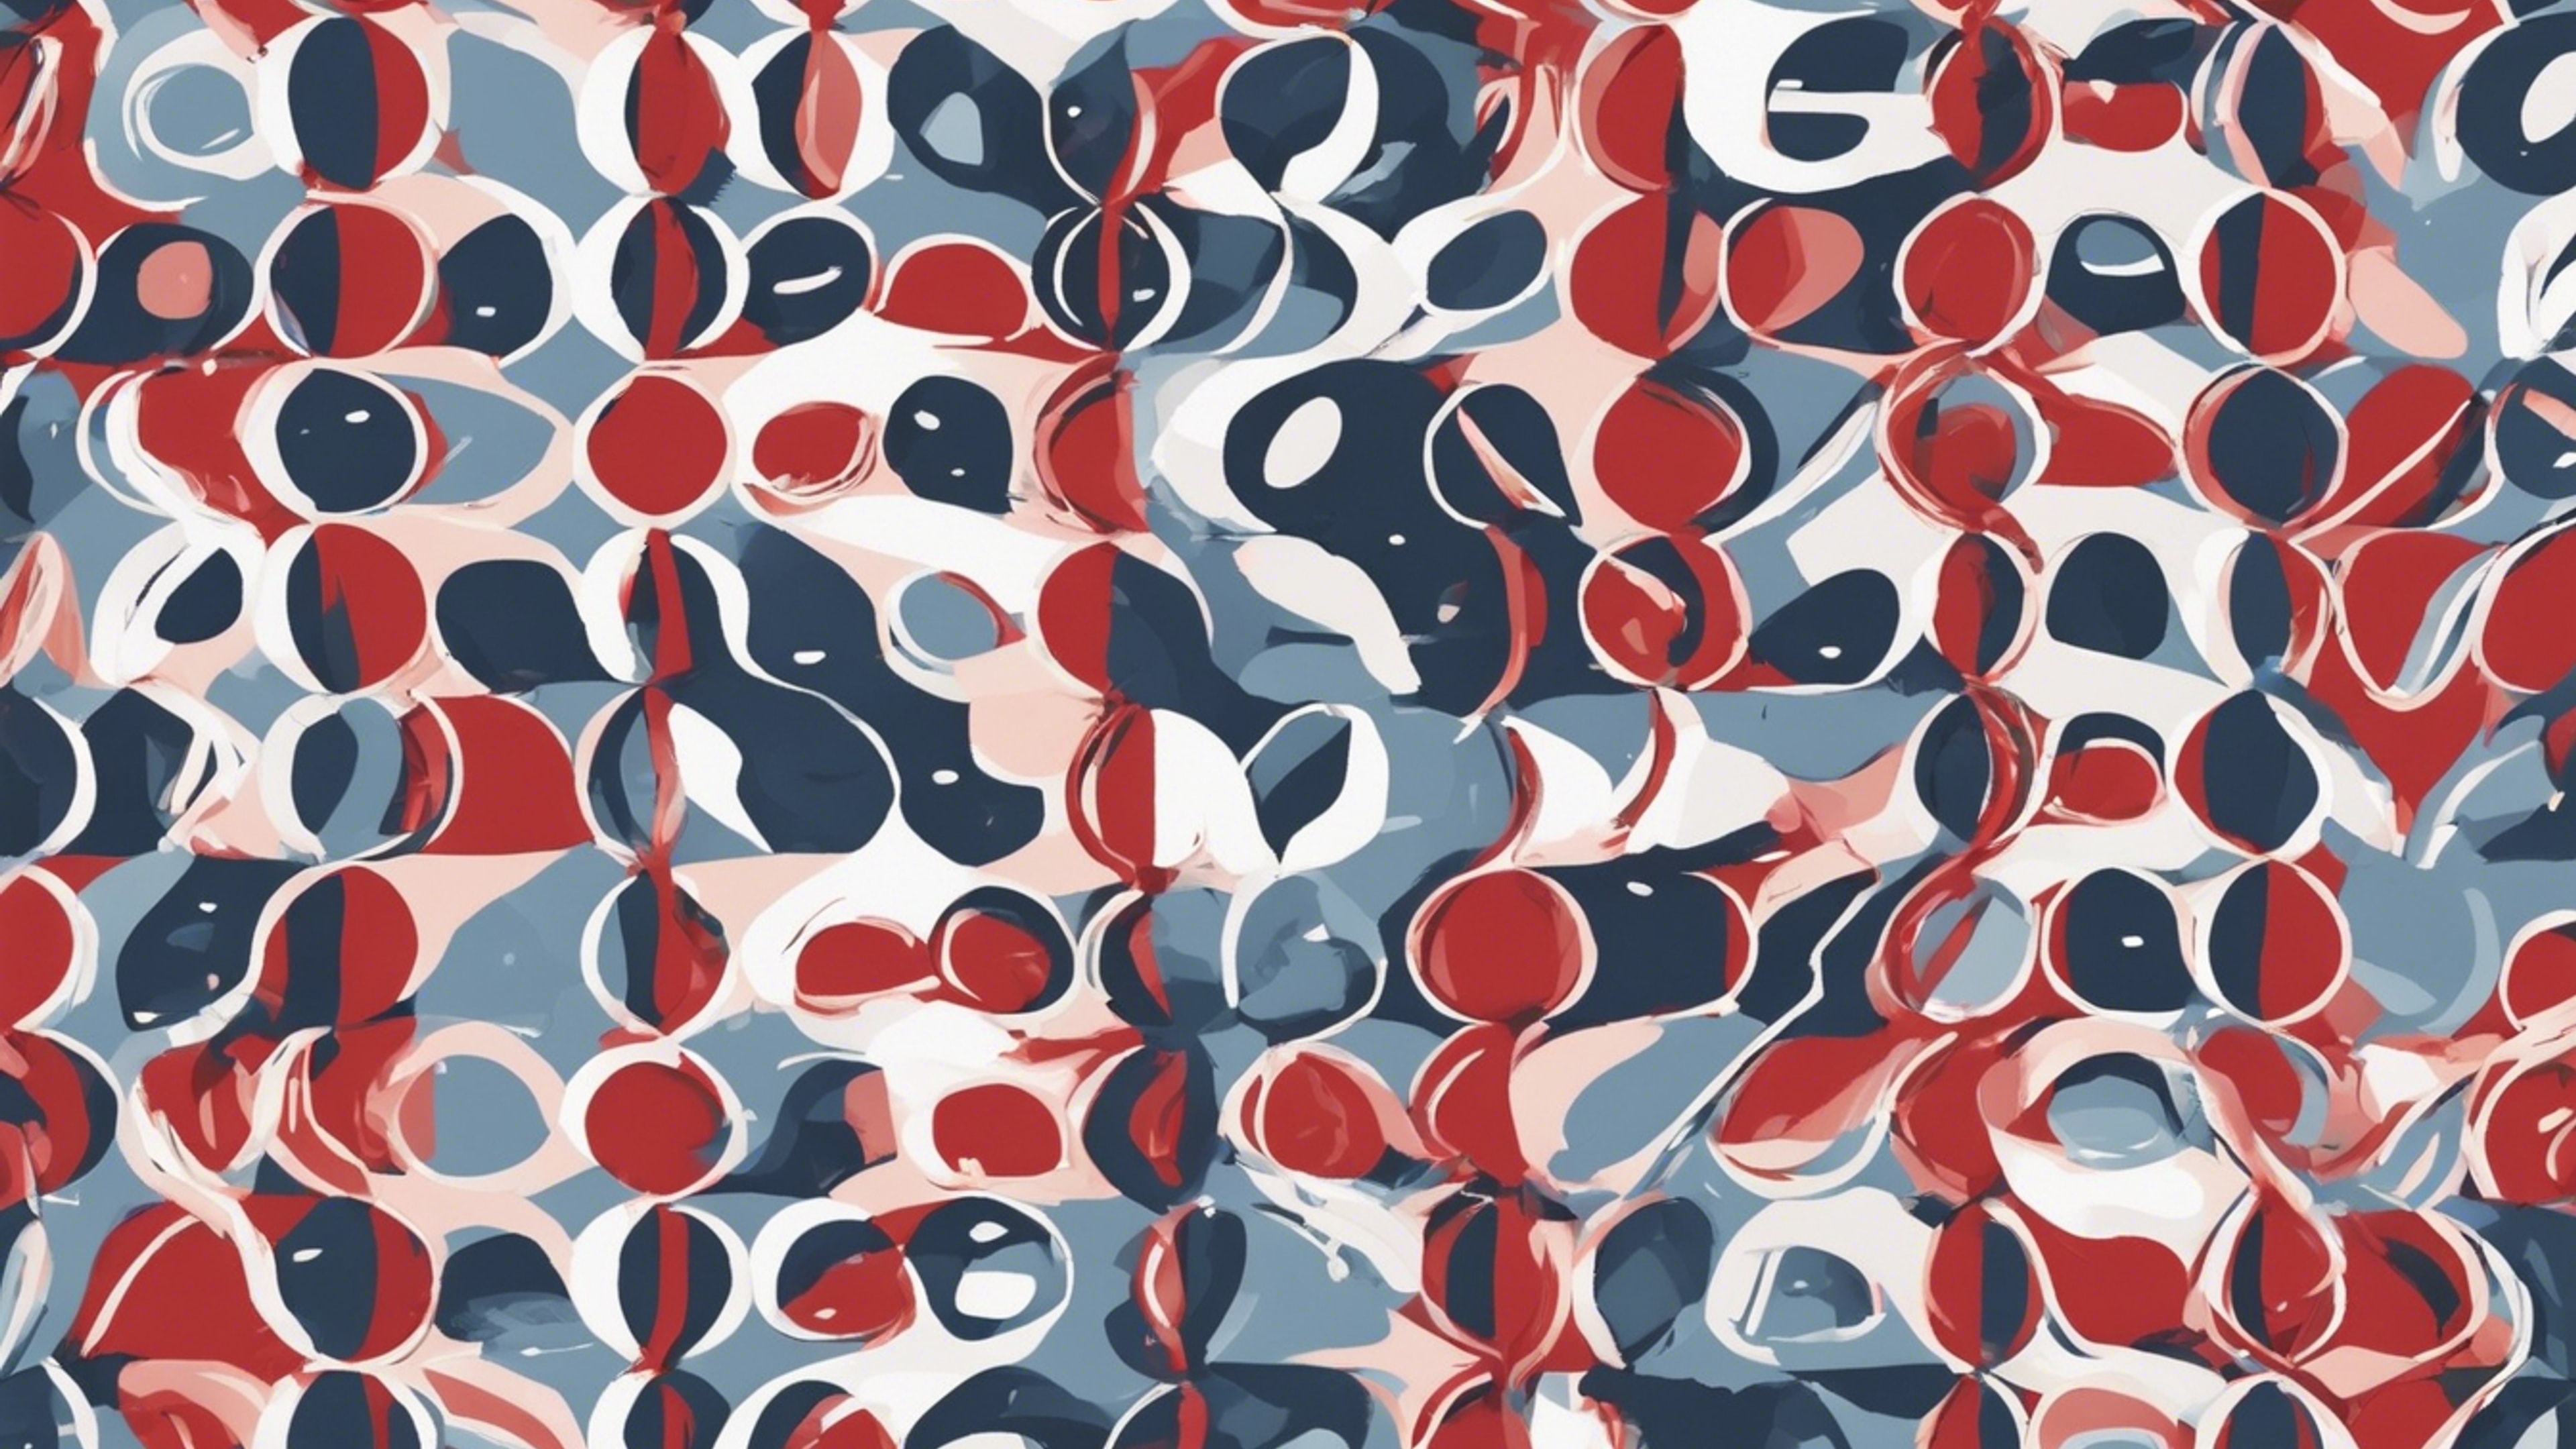 Simple and clean Scandinavian red and blue pattern. Sfondo[367ad8fa403444a2bdd2]